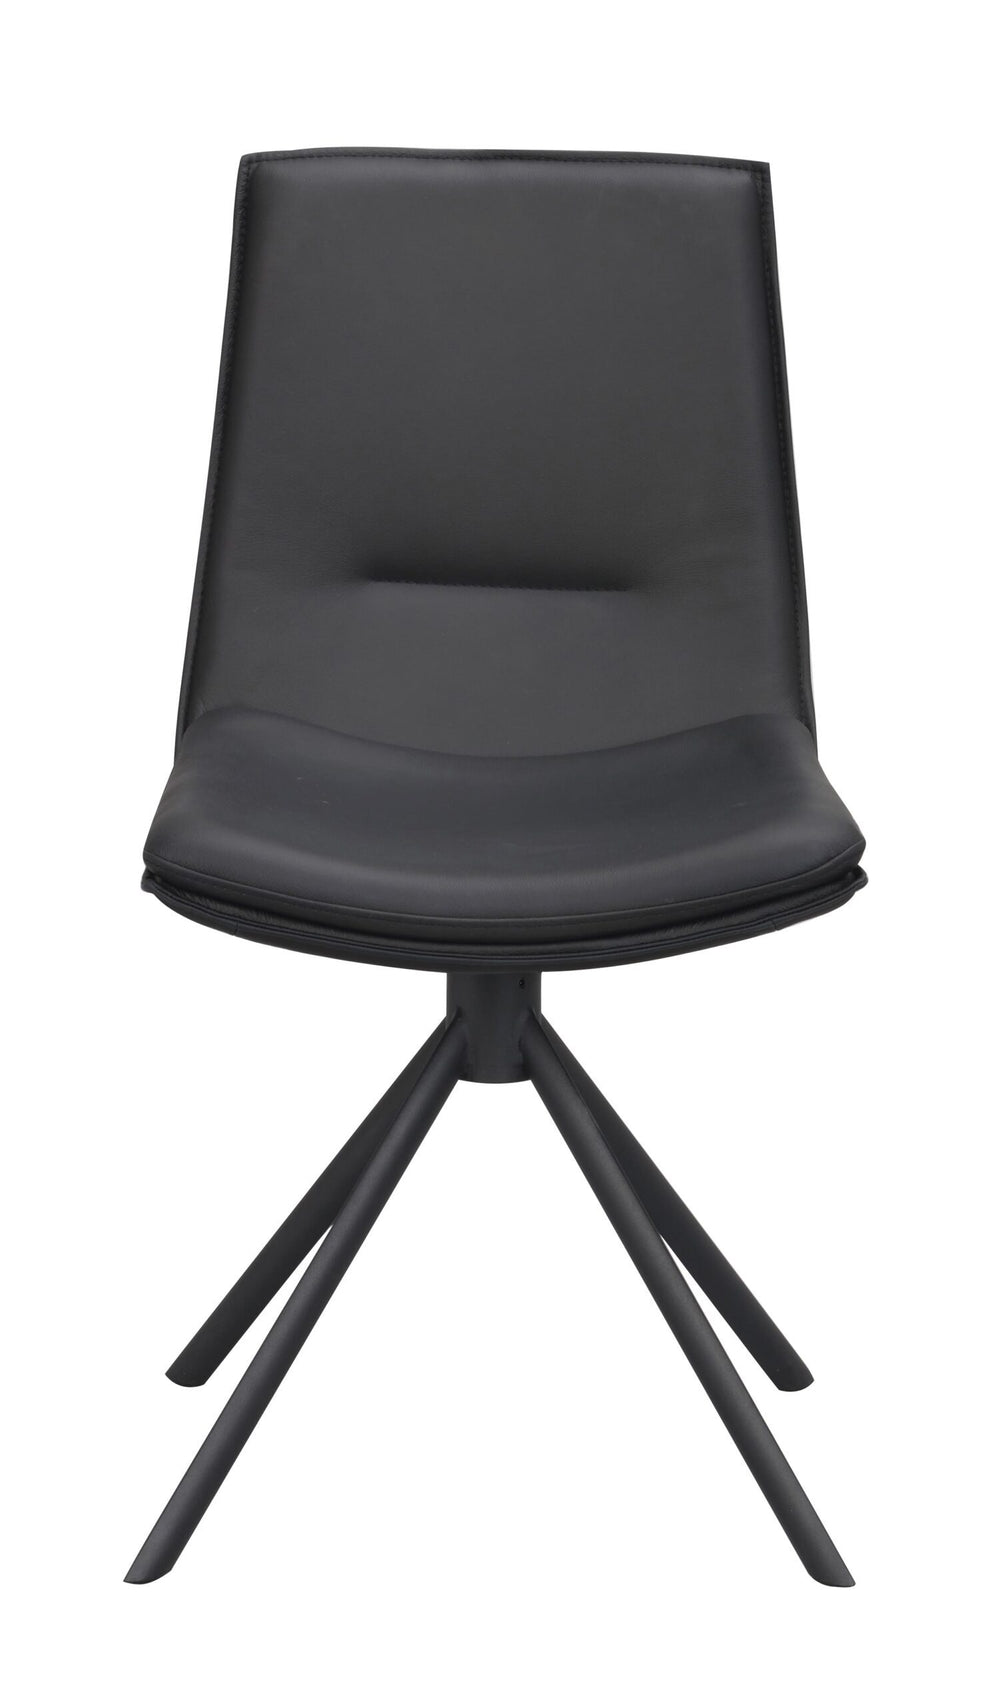 120253_a_Lowell_swivel_chair_black_leather